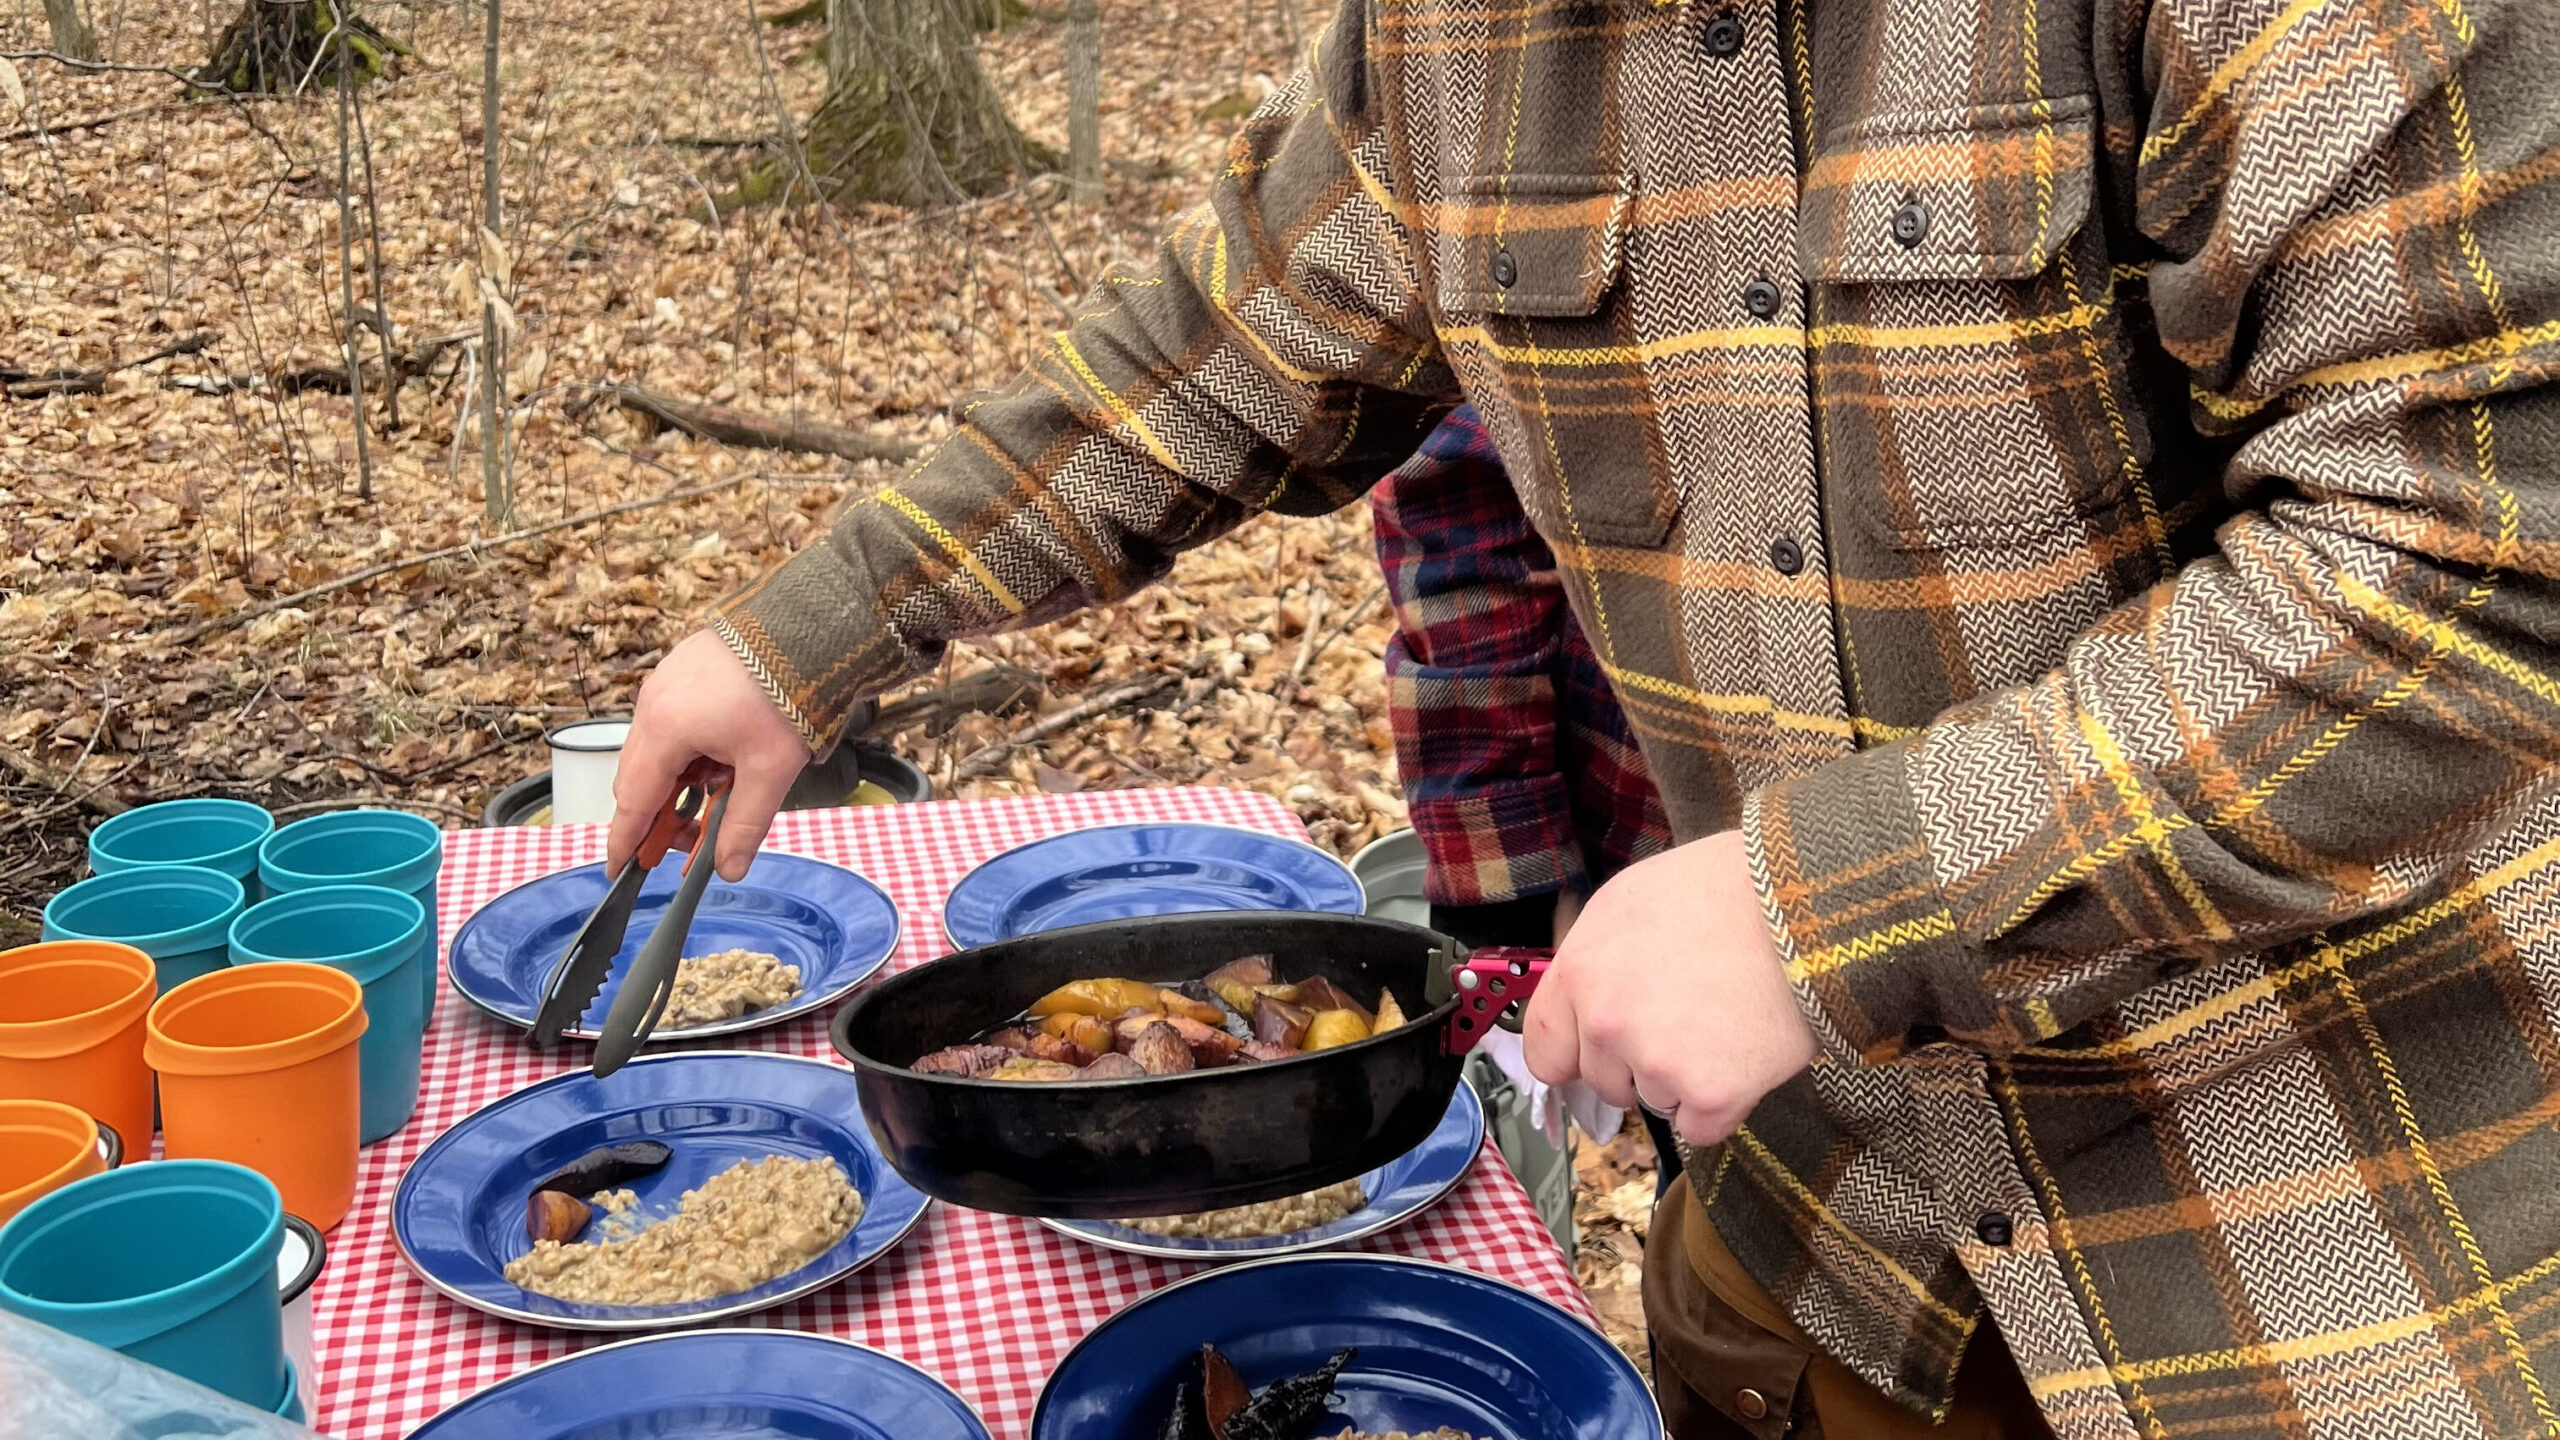 Chef Tyler Scott of serves up dishes at a unique maple infused menu at Red Mill Maple Syrup.

Photos shows hands serving food from a pan to plates.